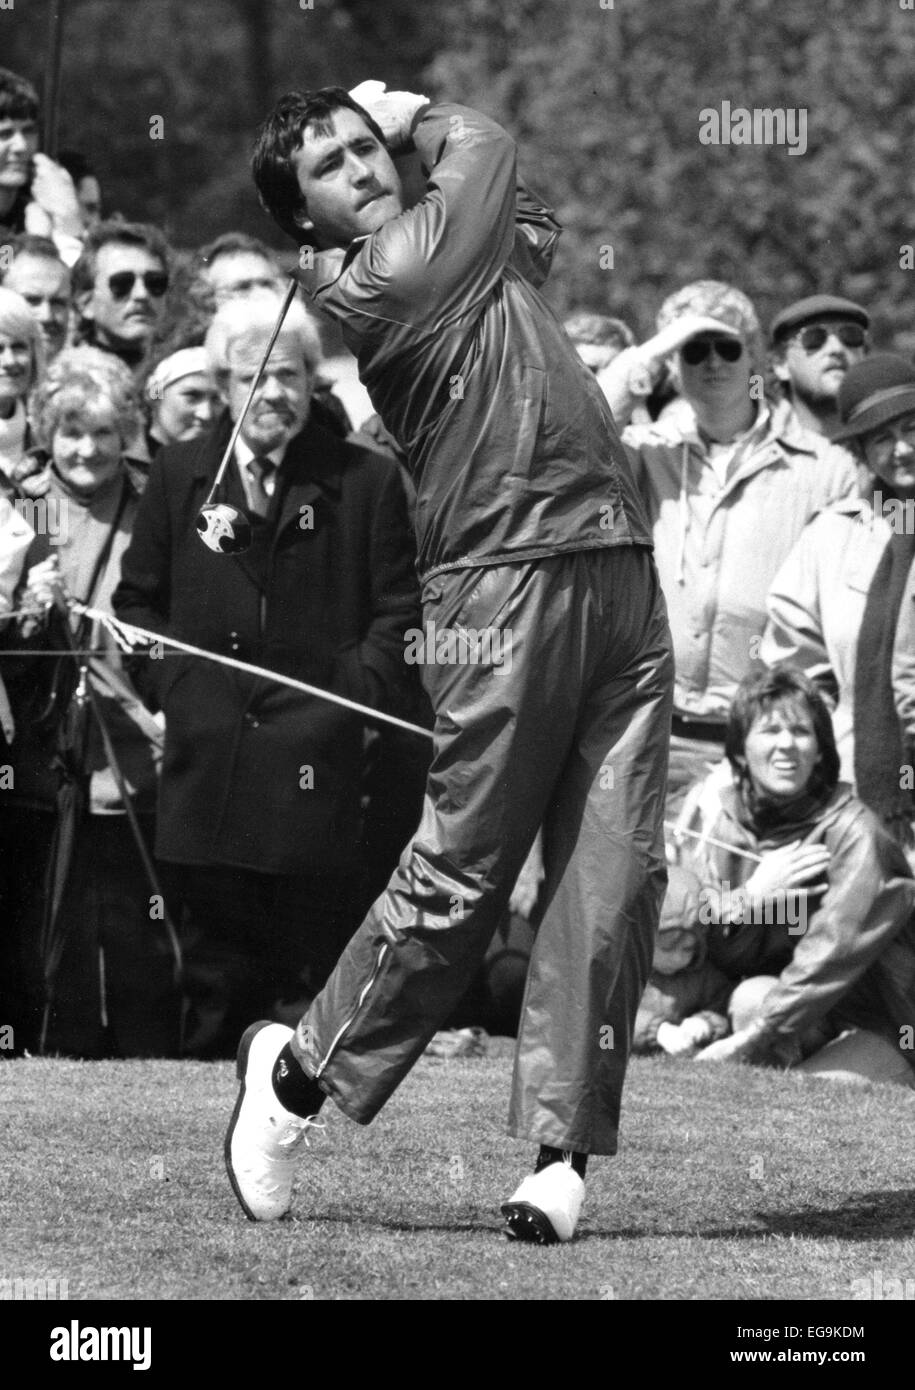 Severiano 'Seve' Ballesteros in action in 1987 at Mannings Heath in a charity pro celebrity event Seve was born 9 April 1957 – 7 May 2011 most famous Spanish professional golfer, a World No. 1 who was one of the sport's leading figures from the mid-1970s to the mid-1990s. Stock Photo